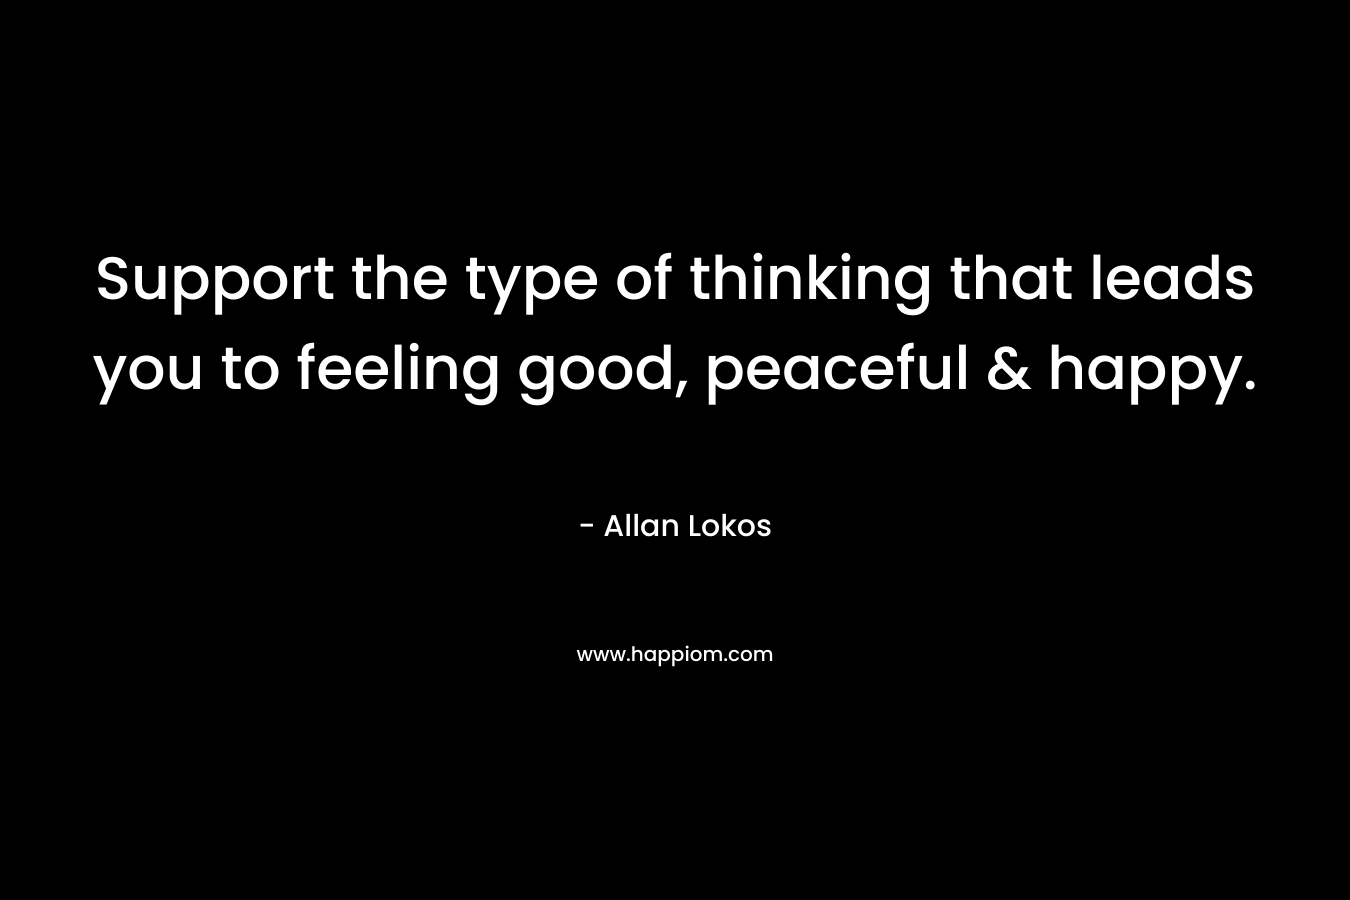 Support the type of thinking that leads you to feeling good, peaceful & happy.